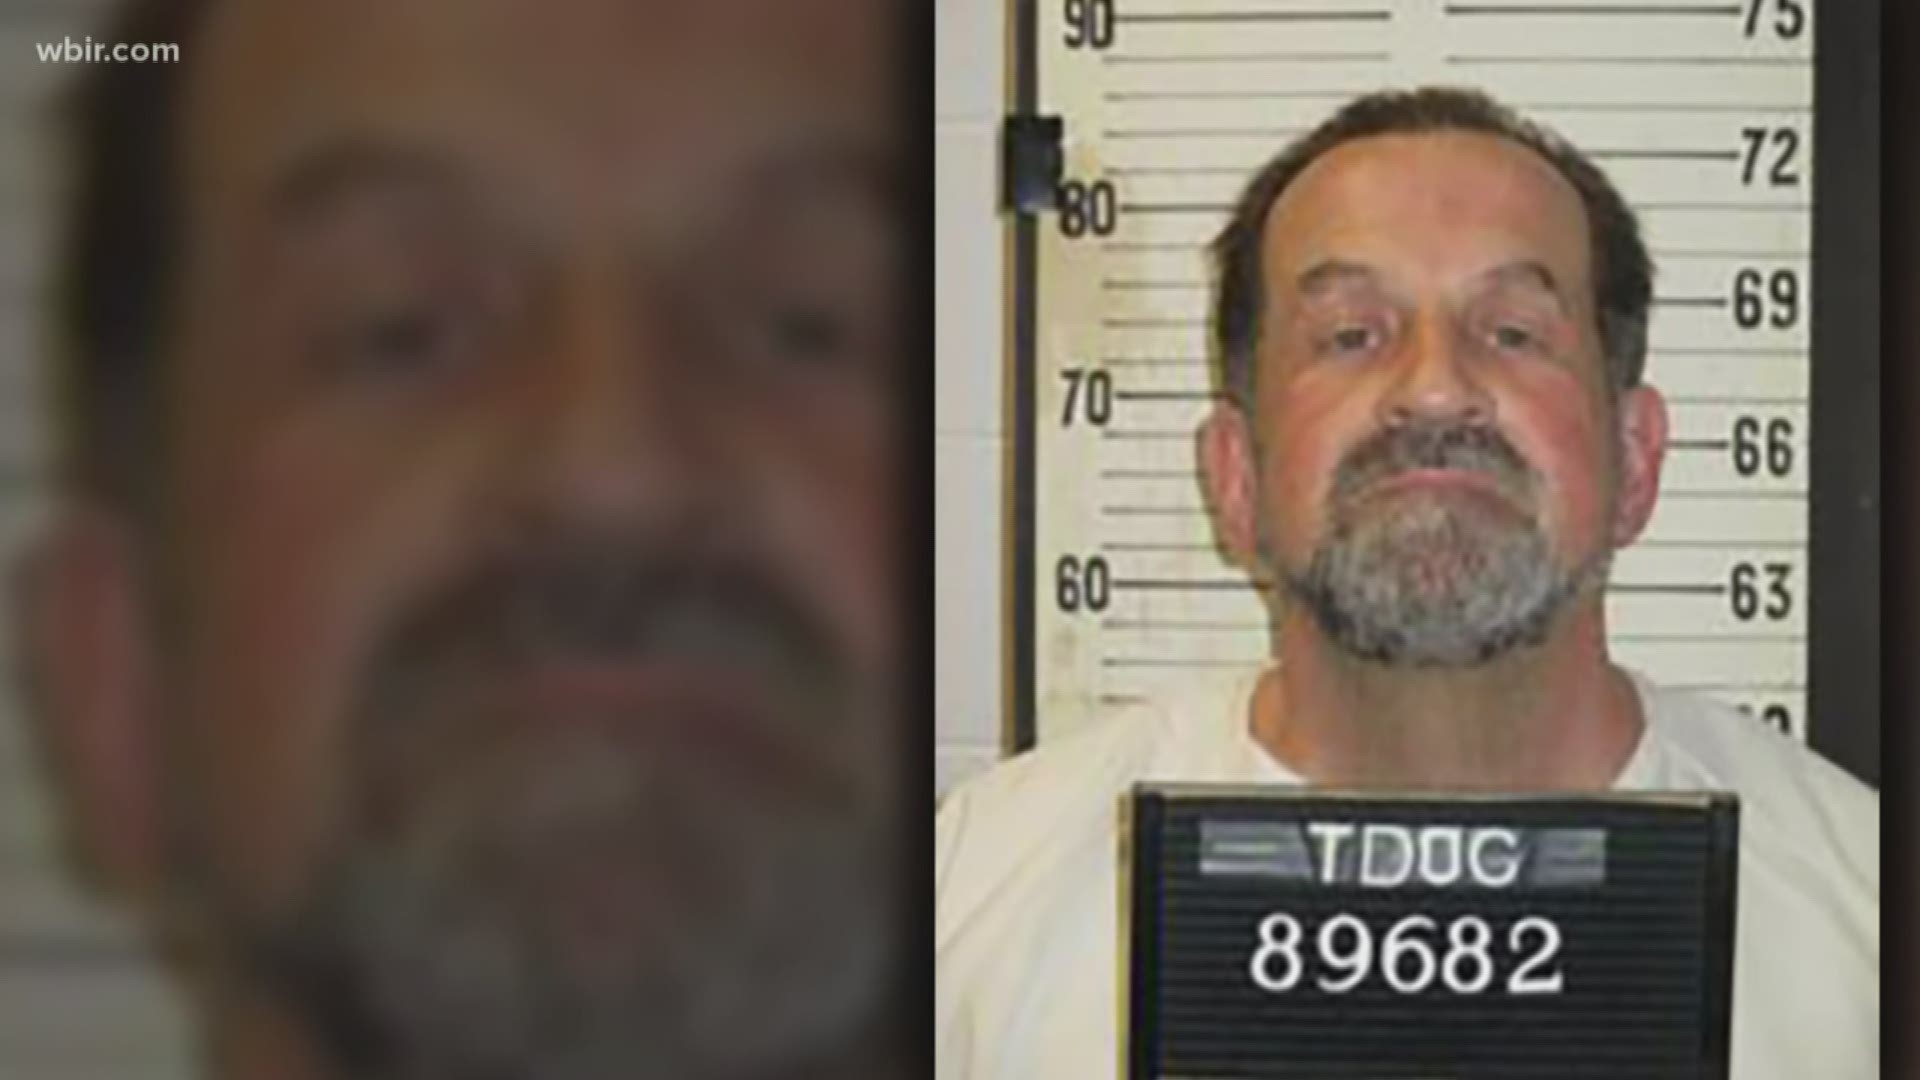 58-year-old Nicholas Sutton was put to death Thursday night for killing a fellow inmate in 1985 while incarcerated for three other murders.